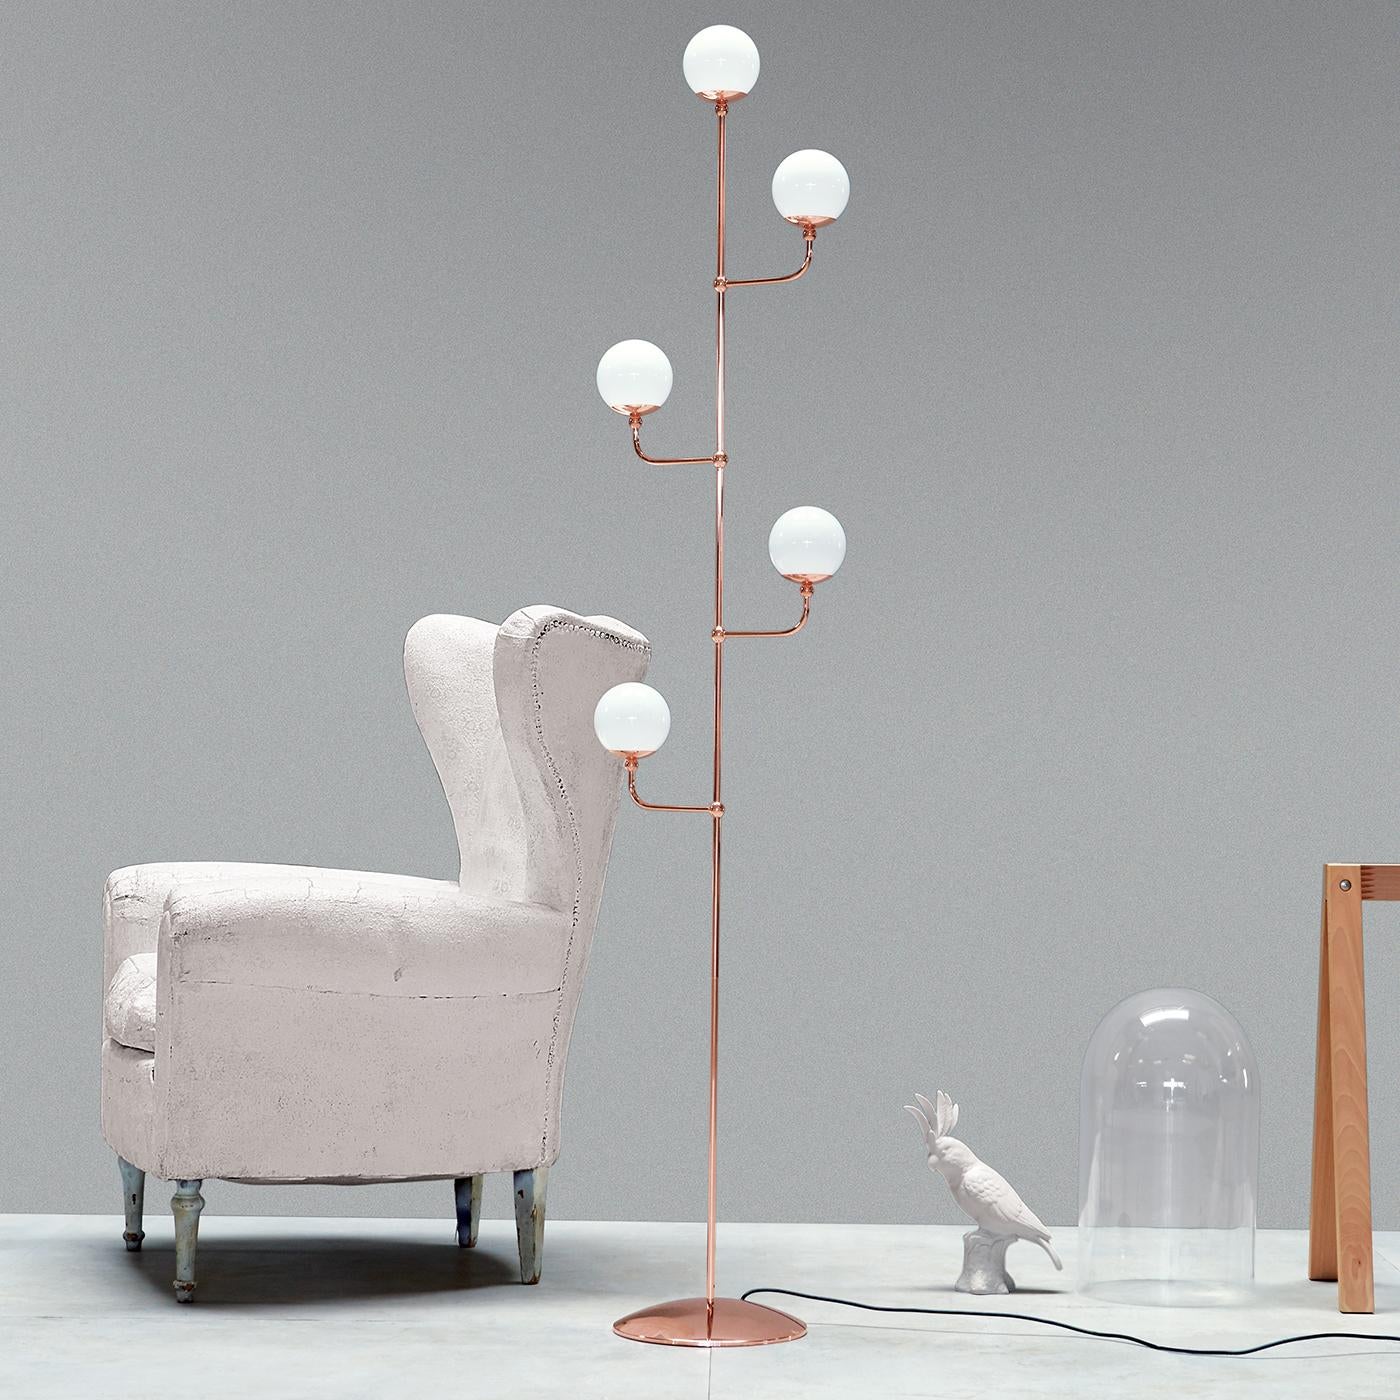 Distinguished by clean and essential lines, the Dots floor lamp displays a subtle metal structure enriched by an exquisite copper finish. Devoid of any unnecessary elements, this striking piece of decor comprises a slender, branched body sitting